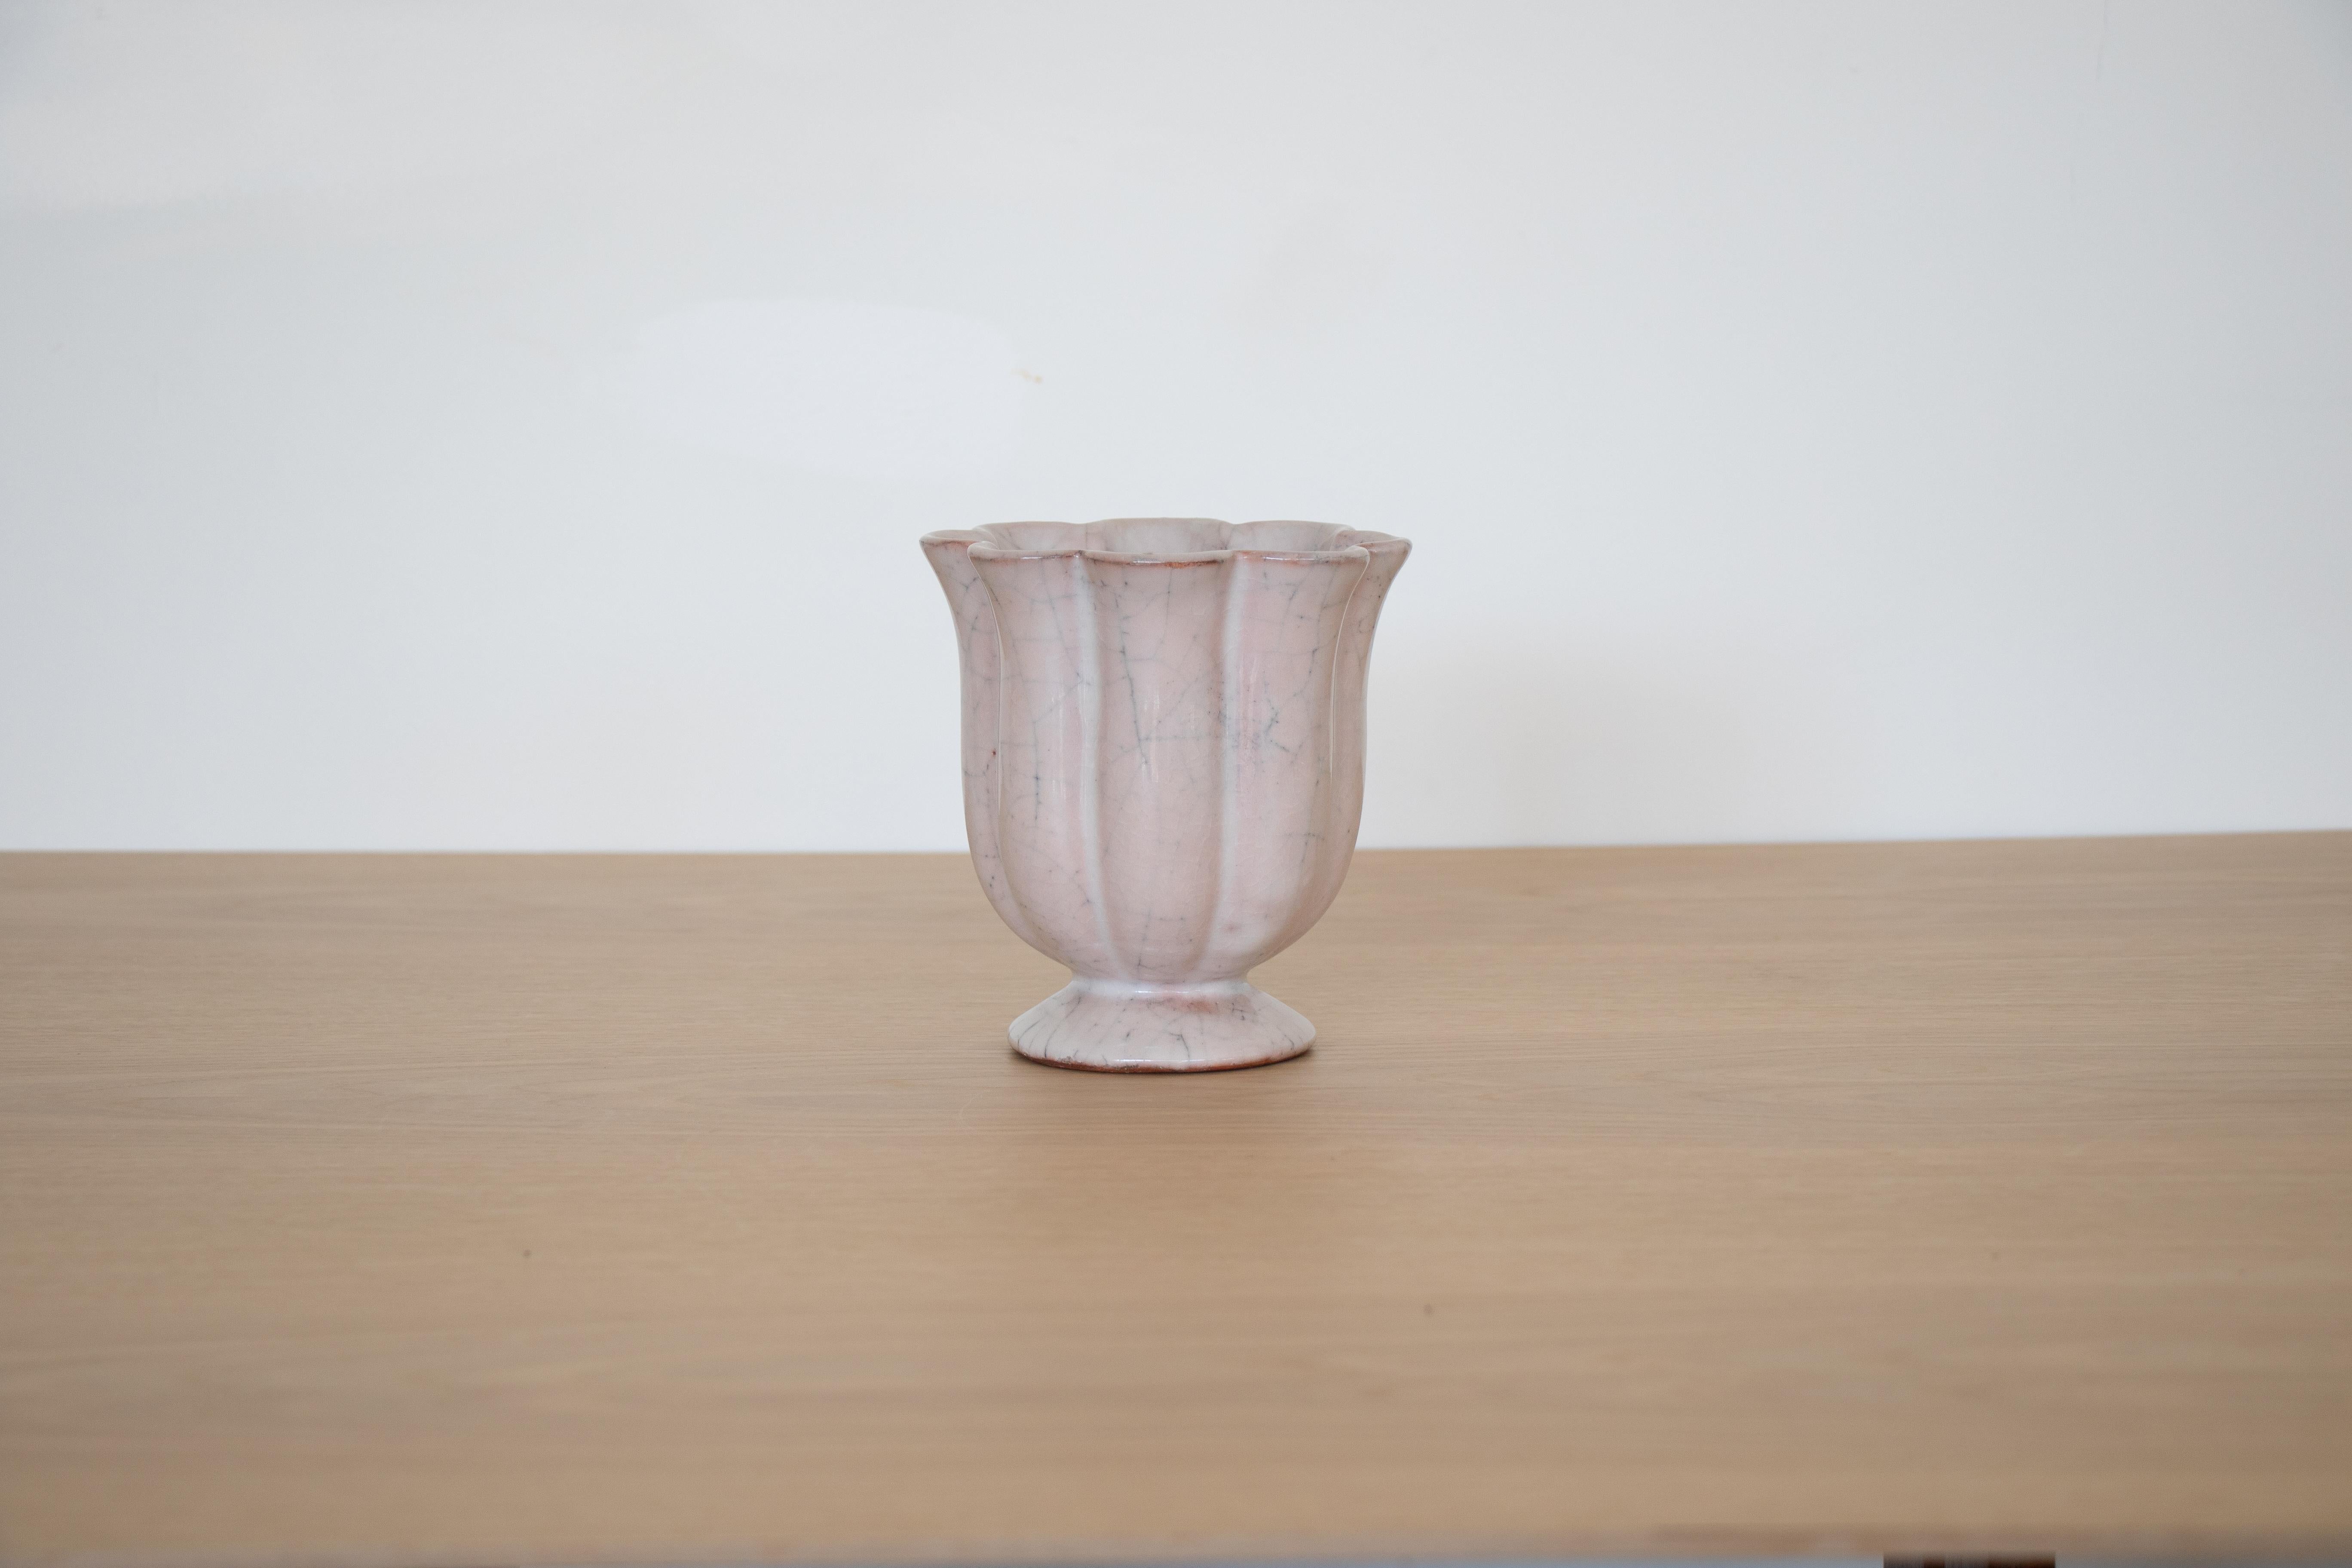 Vintage French Art Deco ceramic vase in a light blush color and scalloped edge detail.